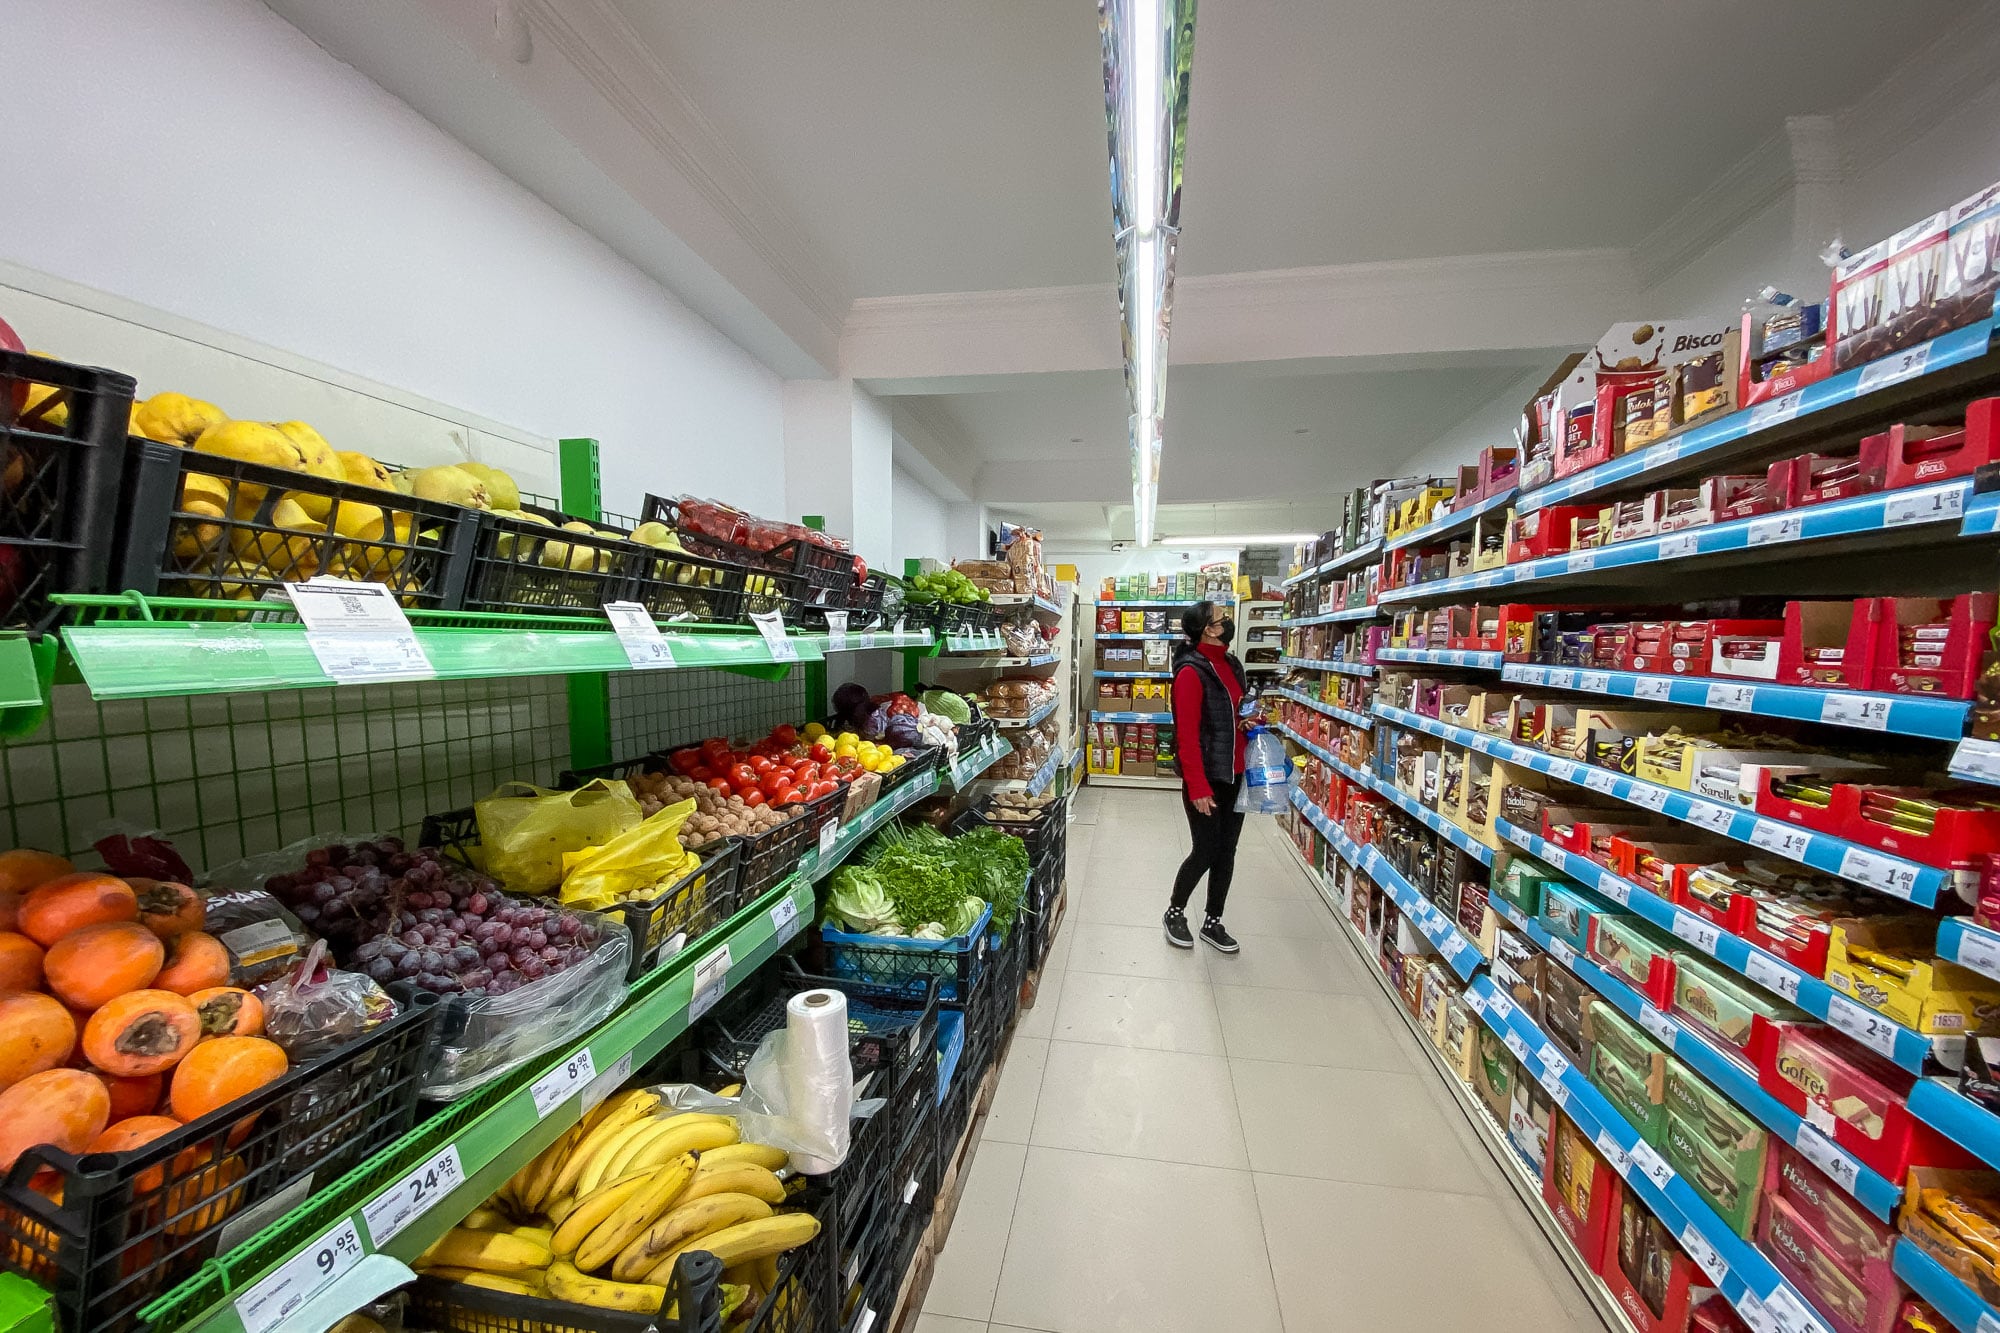 Fruits, vegetables, and candy in an A101 supermarket